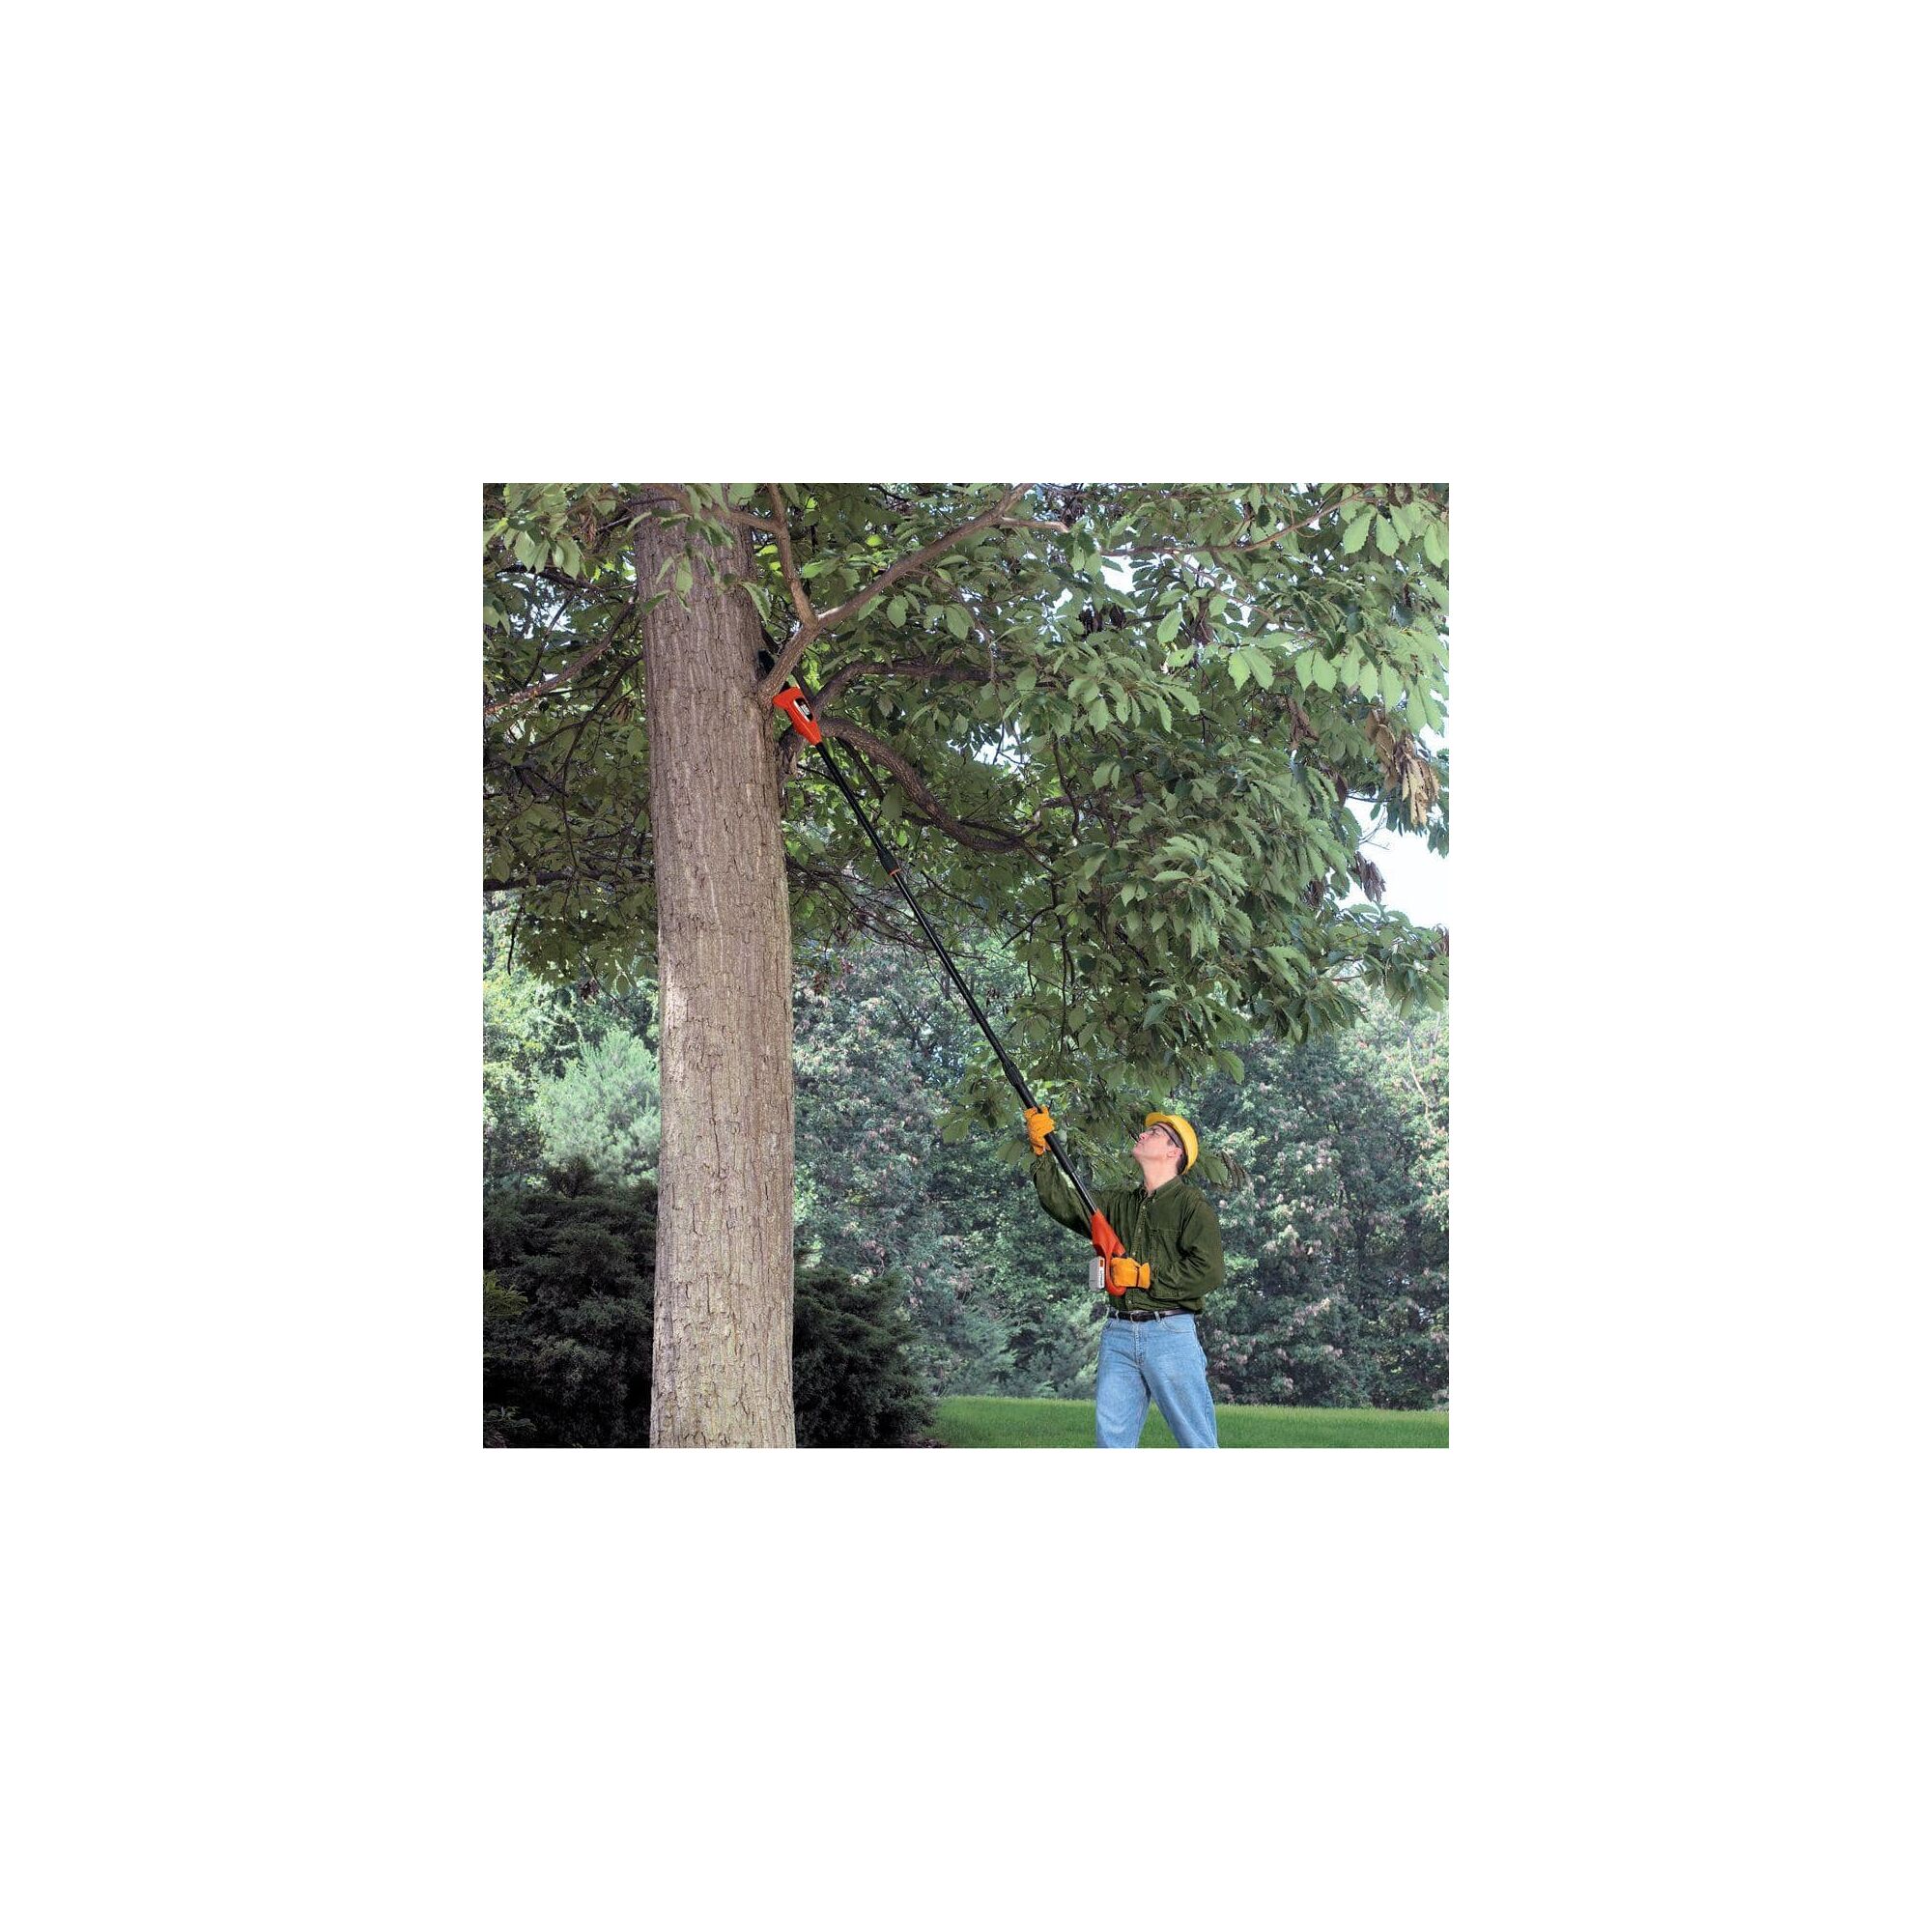 Man using Lithium Pole Pruning Saw to saw branches in a tree above.